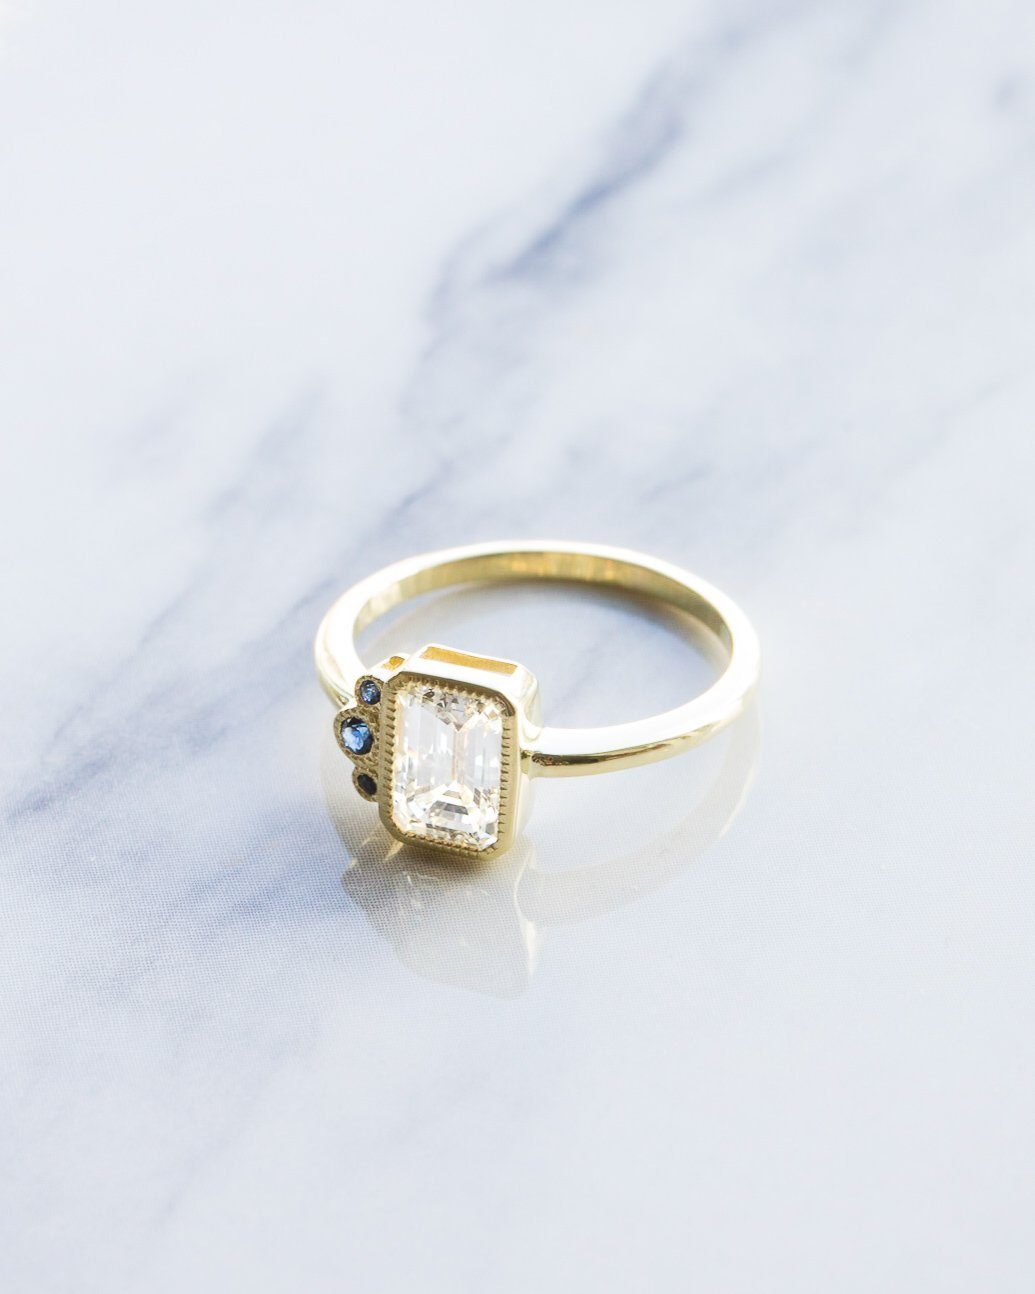 Highlight Blue Cluster Engagement Ring With Emerald Cut by Good Stone available in Gold and Platinum